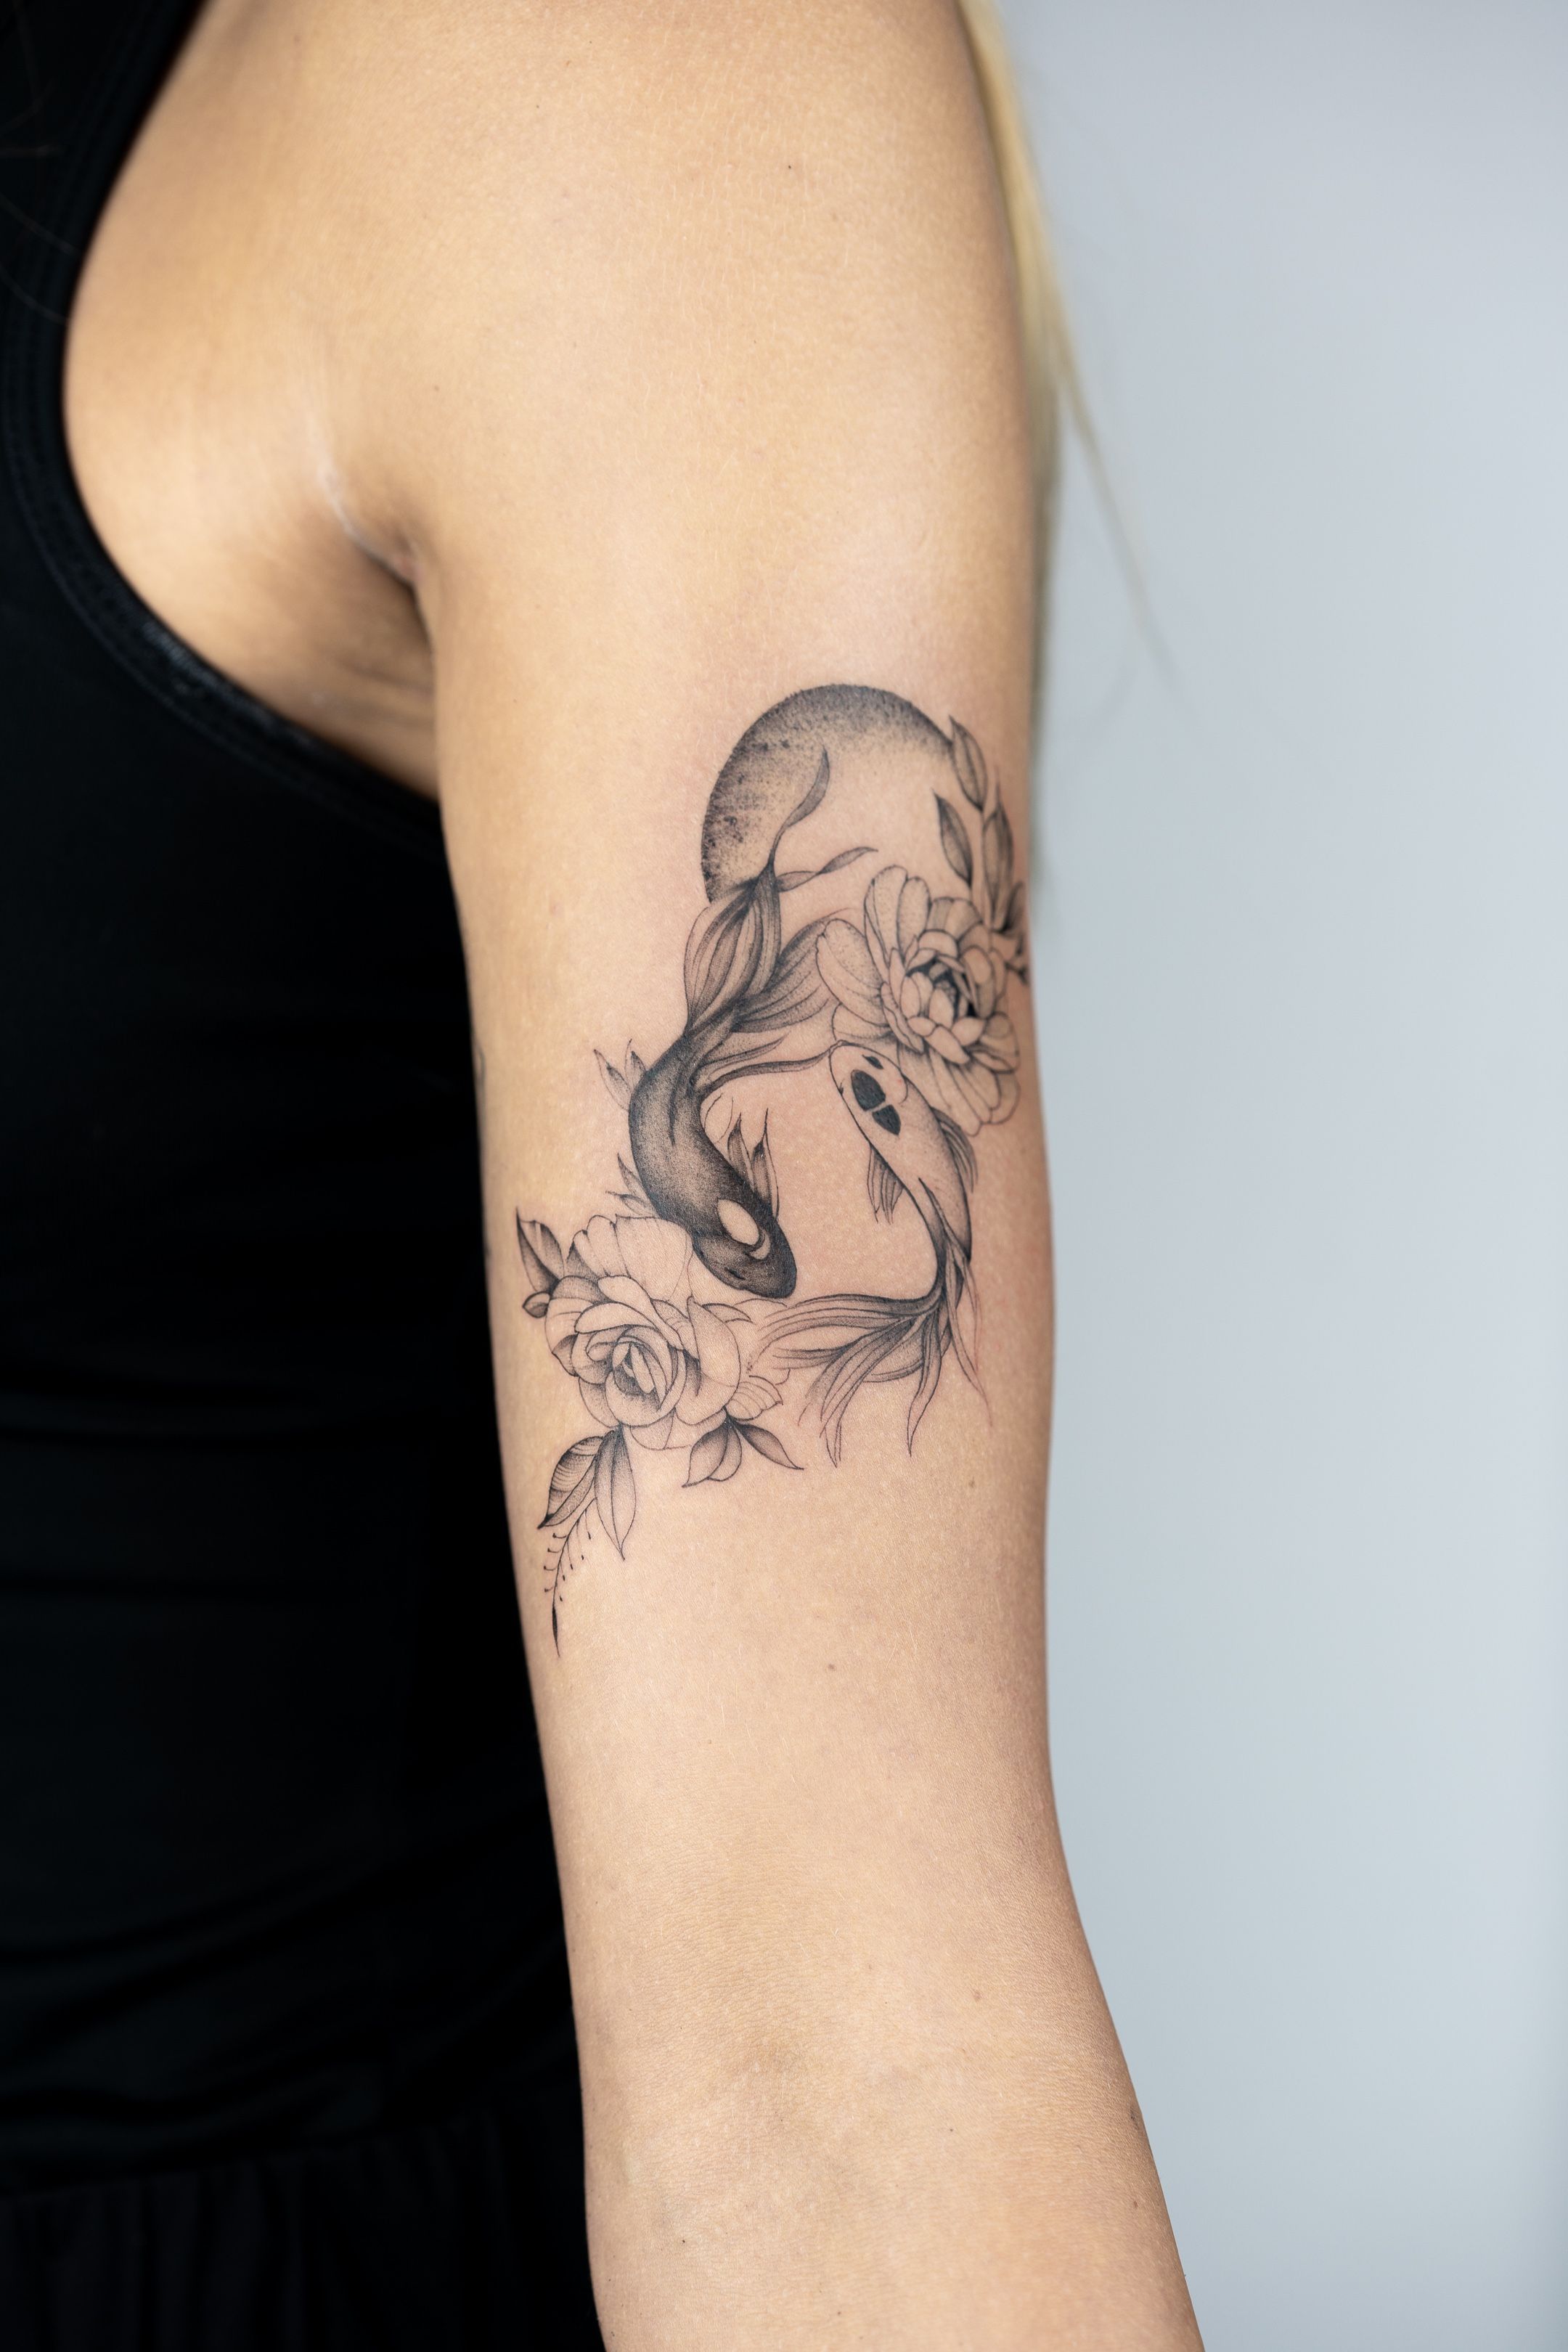 Tattoo uploaded by Jessica Coates • Two gorgeous koi carp with pretty lil  flowers, my first big tattoo ! Still debating whether to colour but I do  love just the black inc,